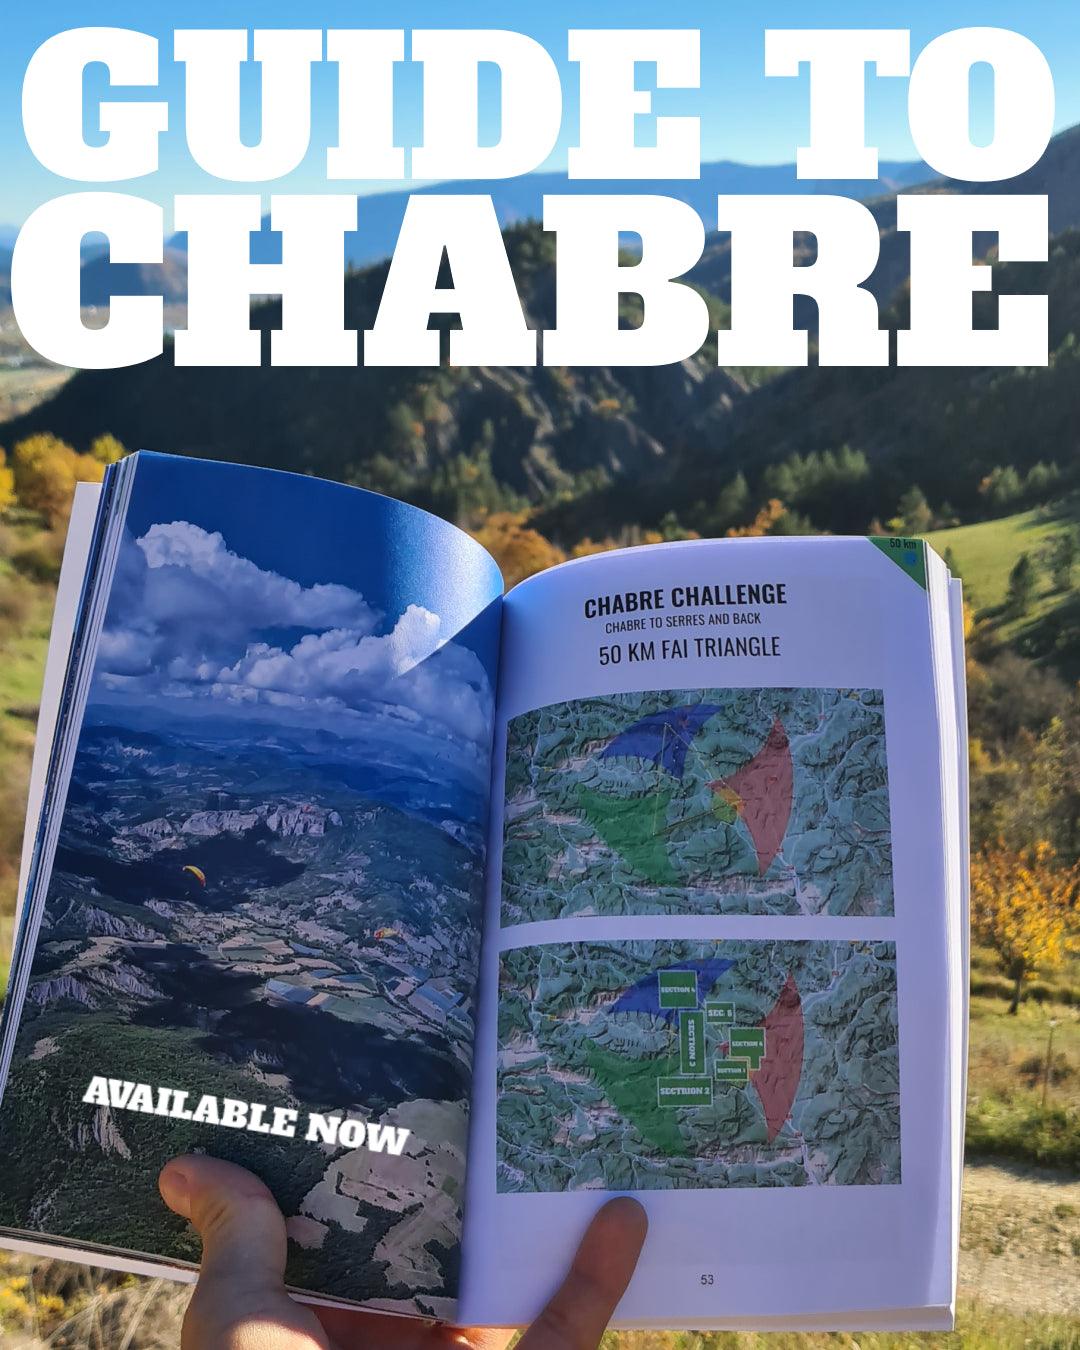 GUIDE TO CHABRE - A step by step route guide for cross country flying from Chabre, France. - flyingkarlis